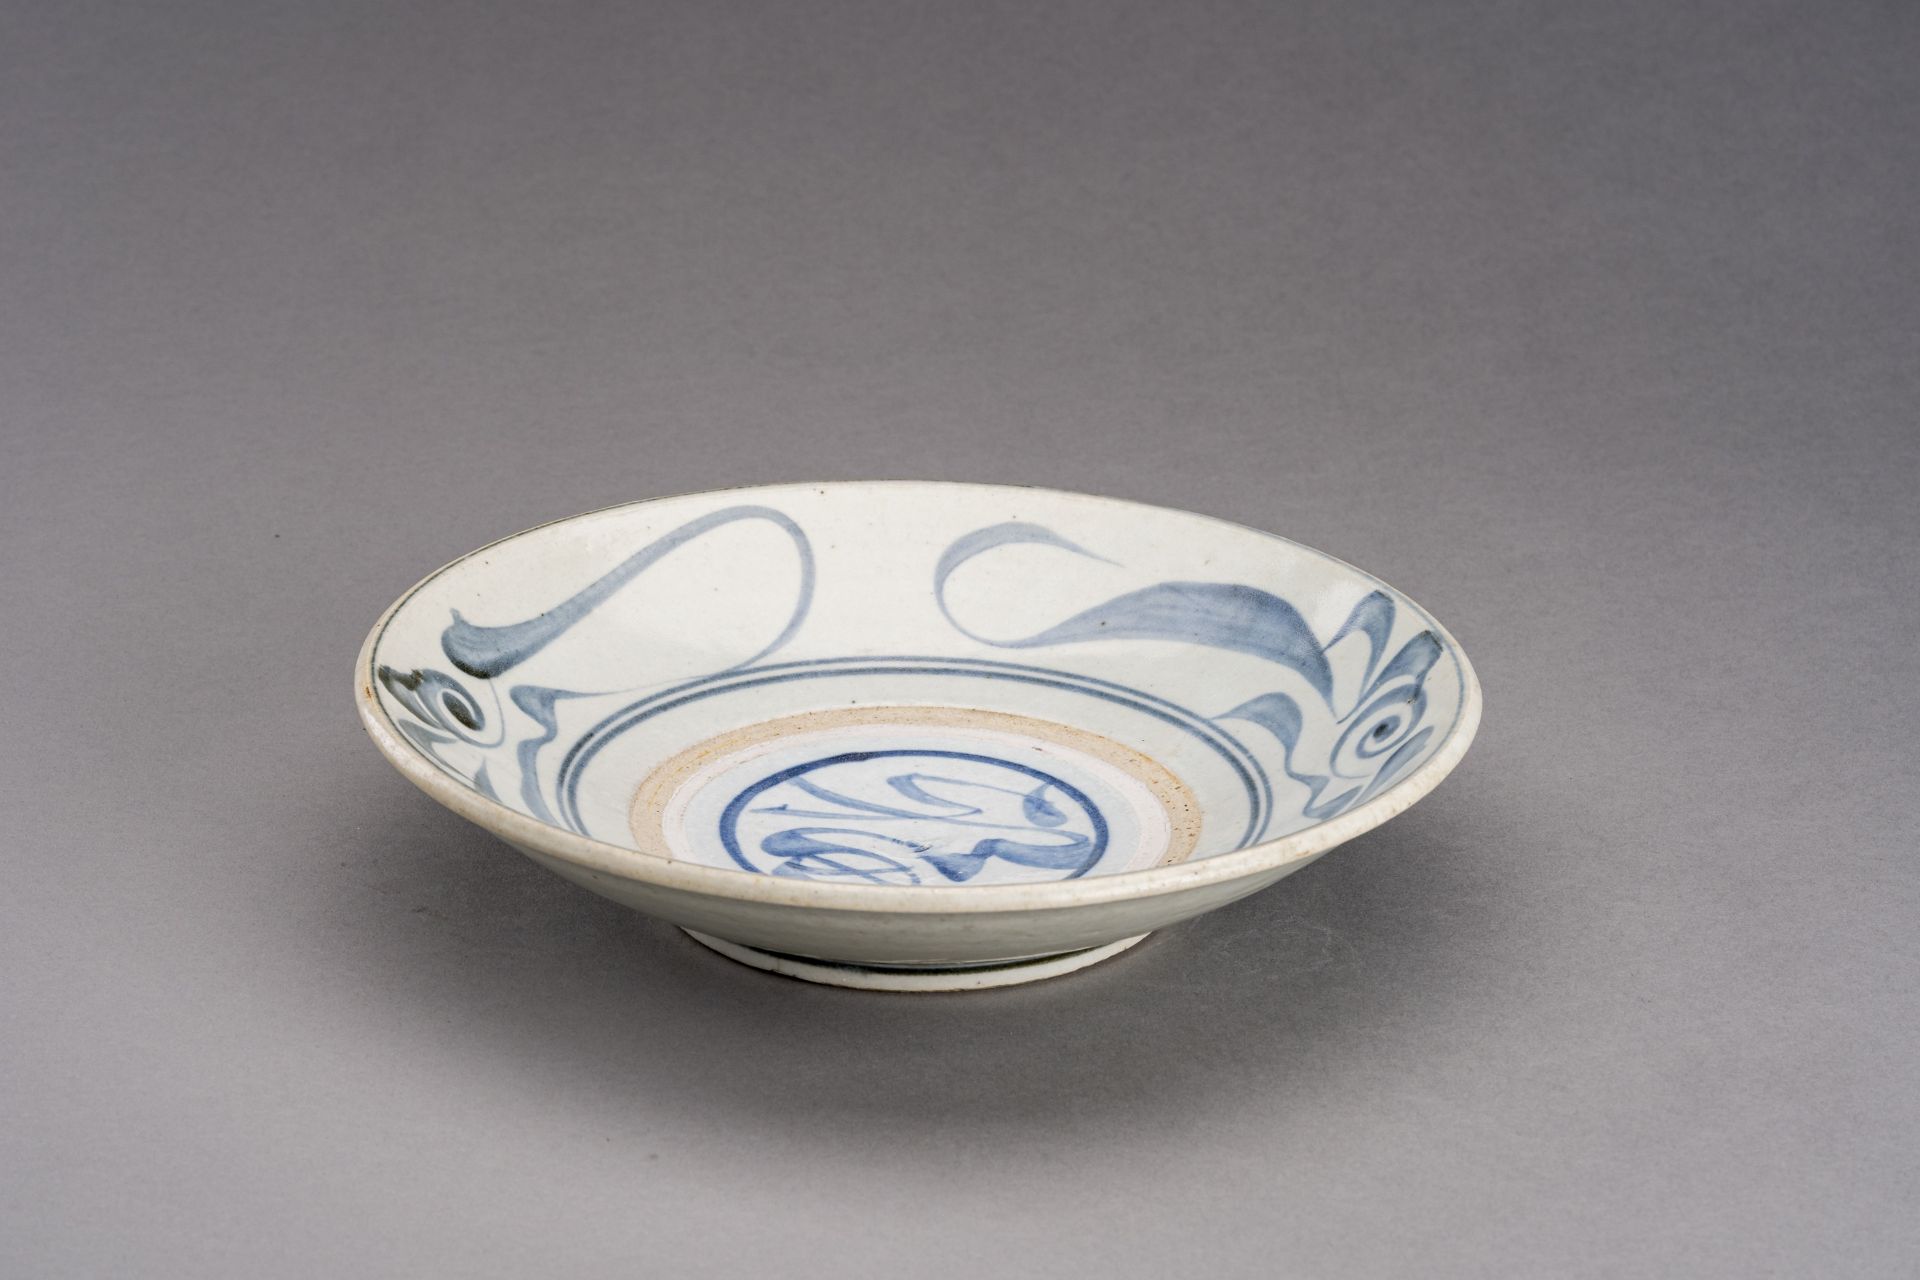 A BLUE AND WHITE PORCELAIN DISH, EARLY QING DYNASTY - Image 4 of 7